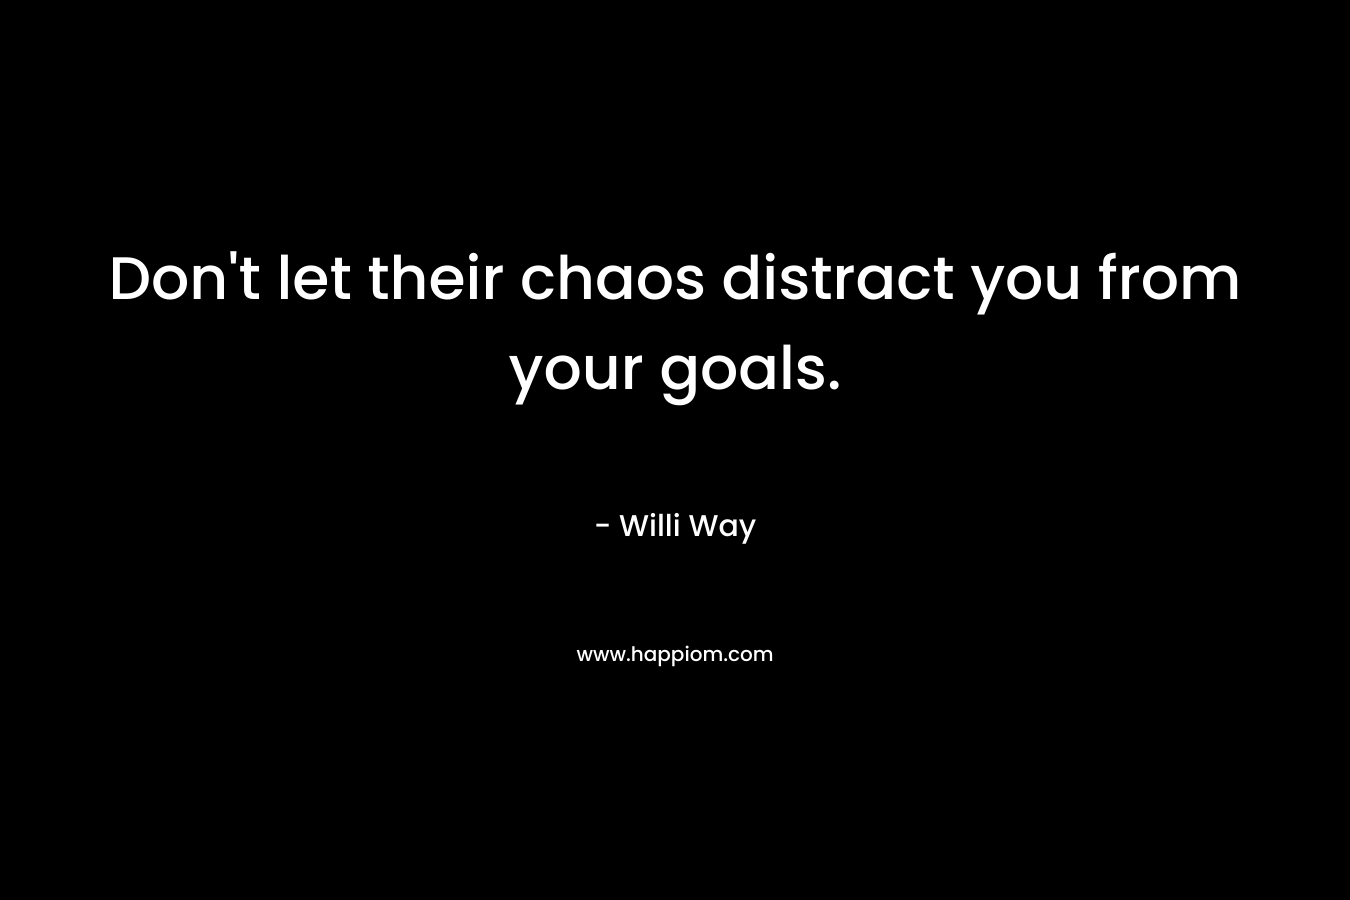 Don't let their chaos distract you from your goals.